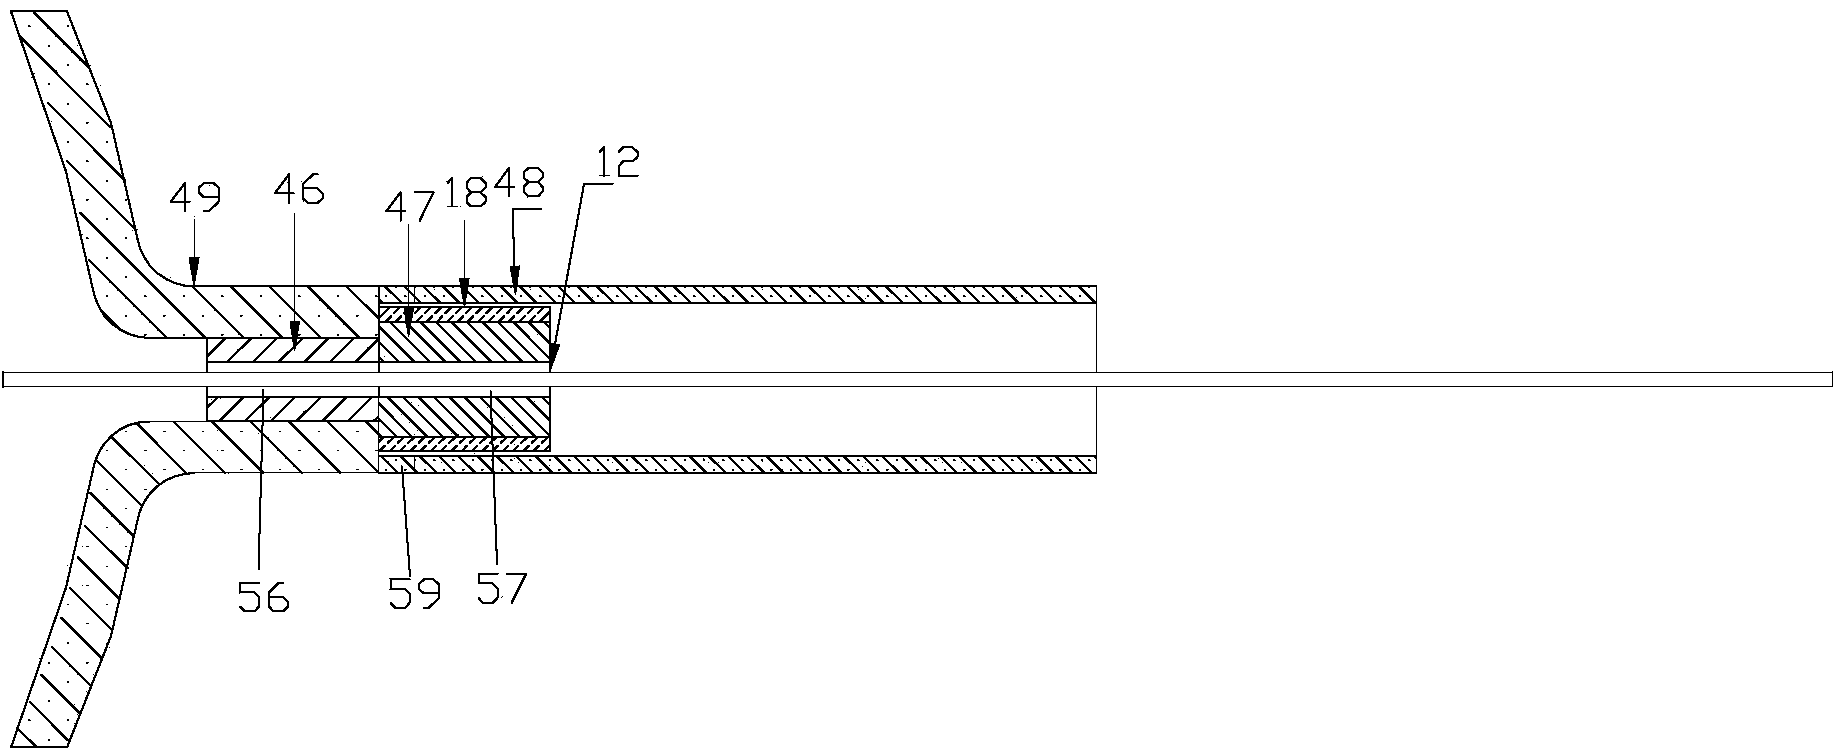 Multi-electrode basket catheter and manufacture method thereof